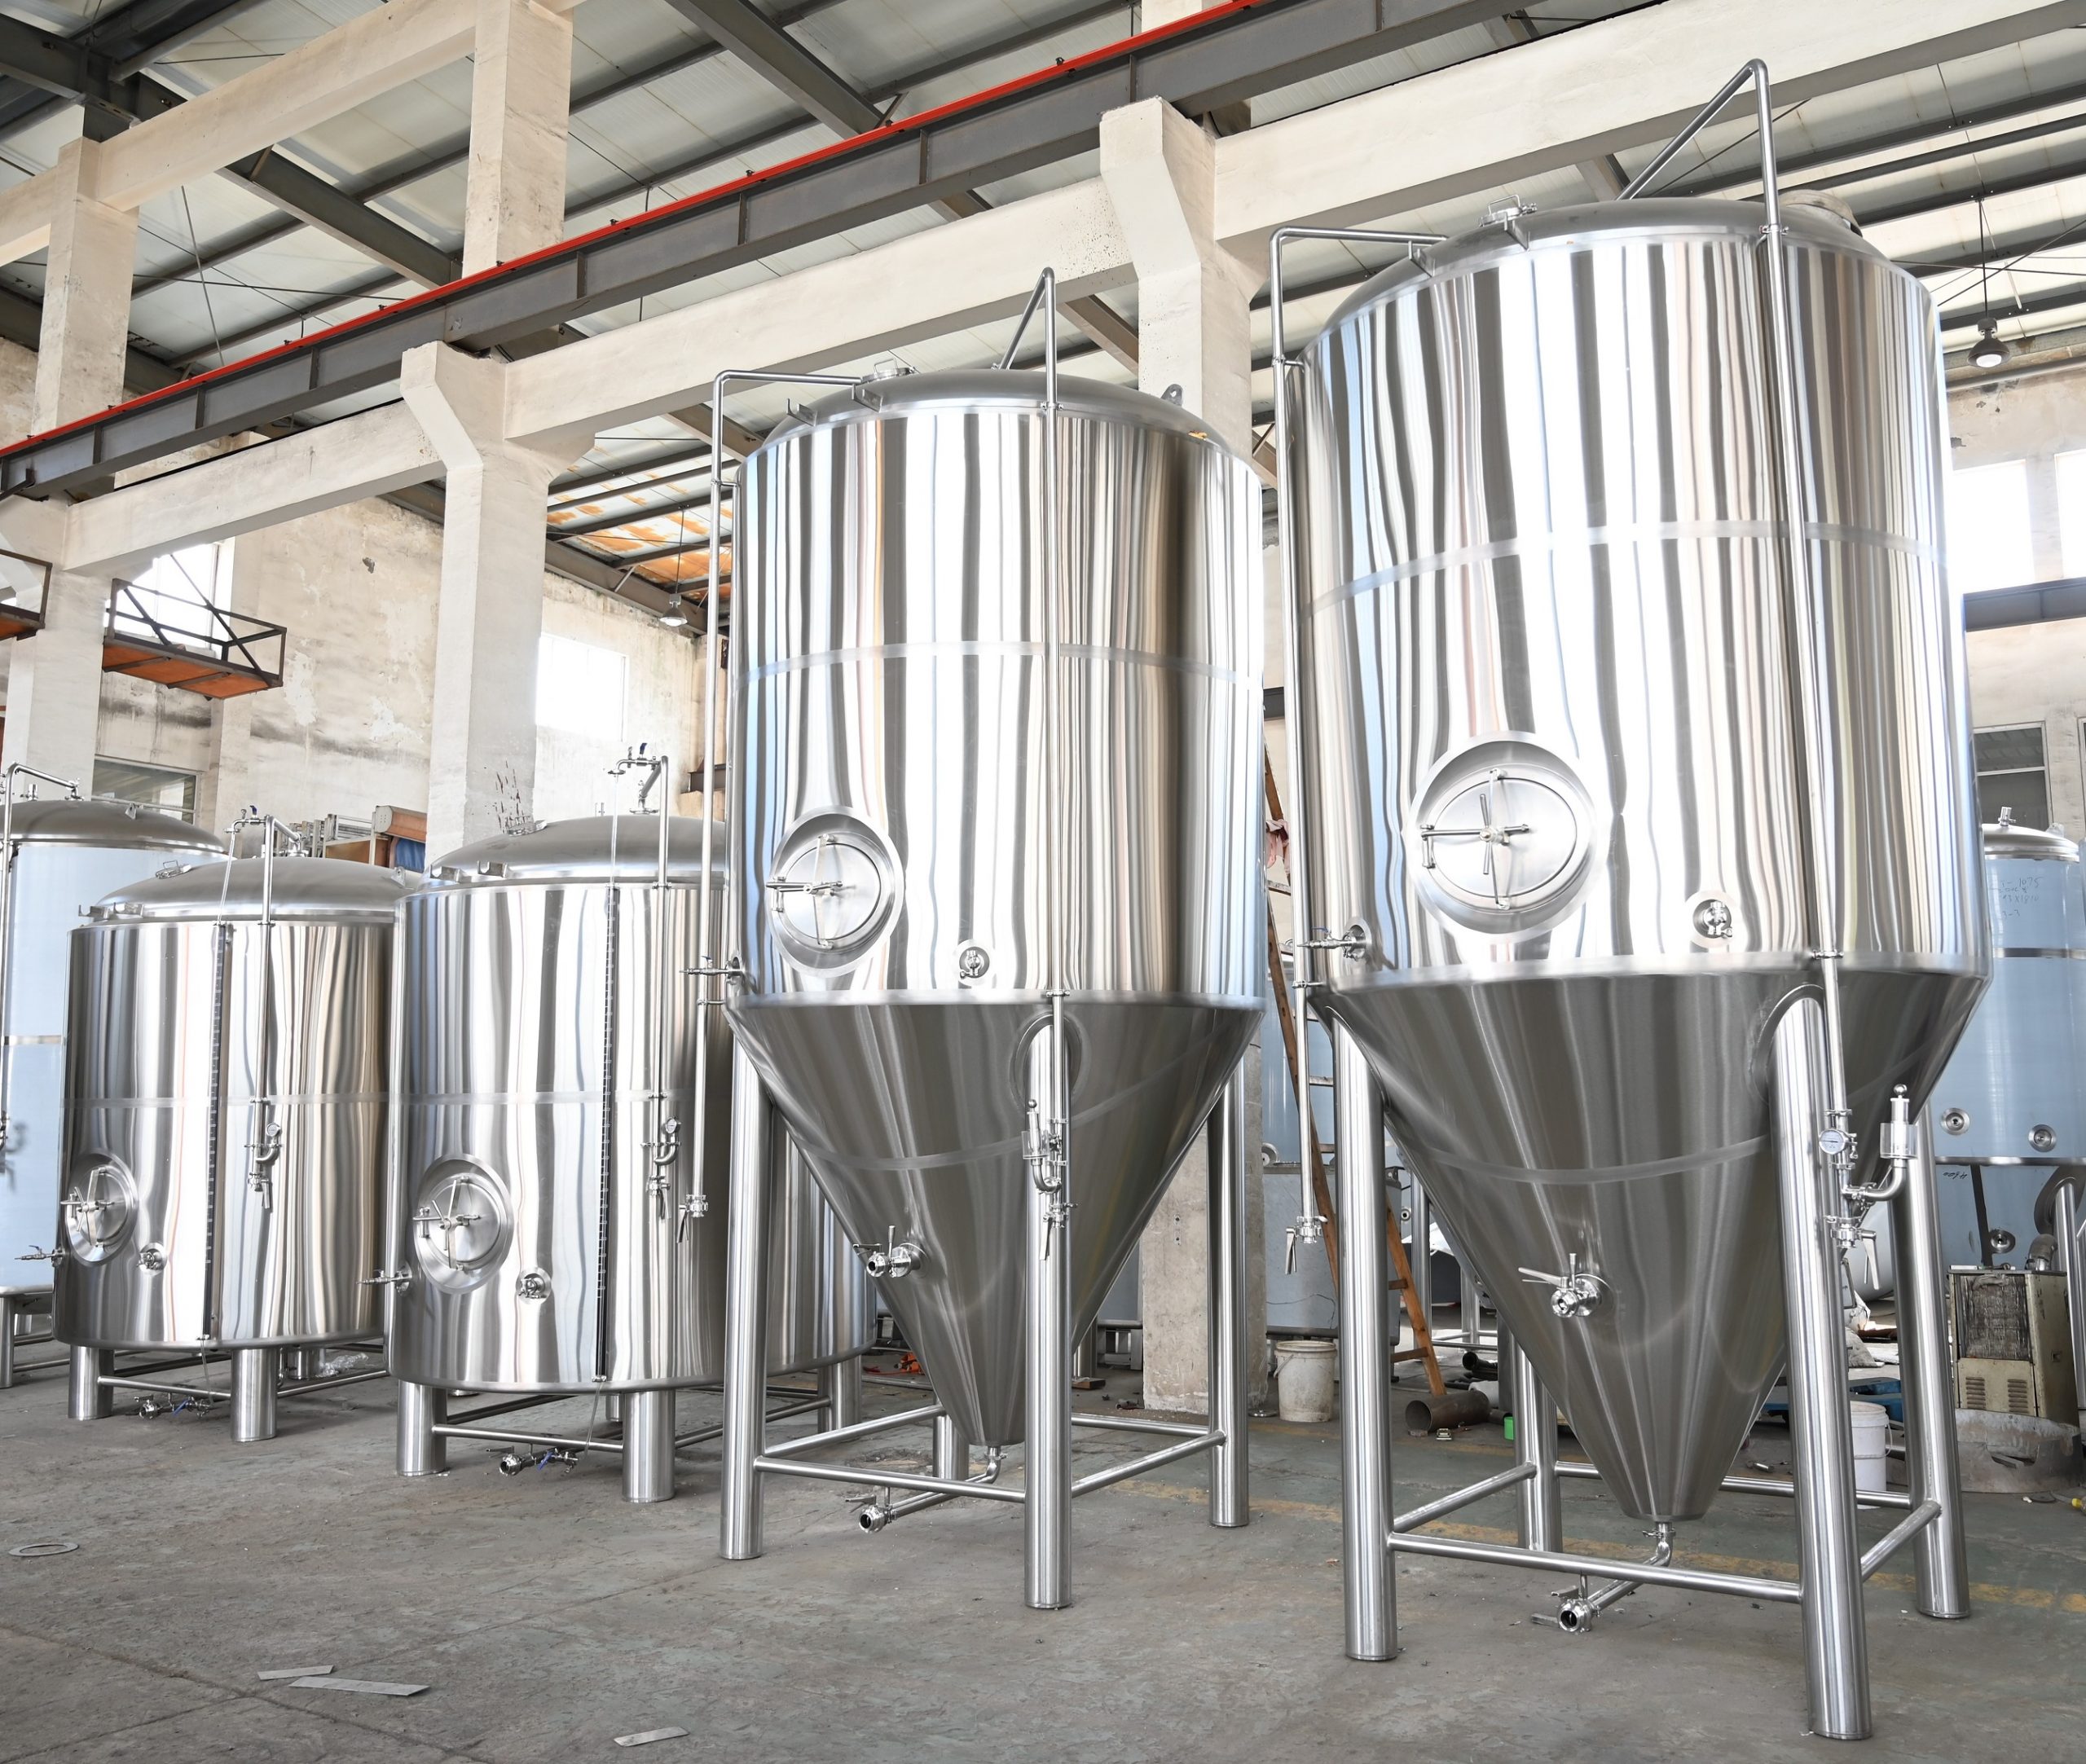 2x60BBL Beer Fermenters+2x60BBL Brite Beer Tanks Were Arranged Shipping To Seattle, WA!